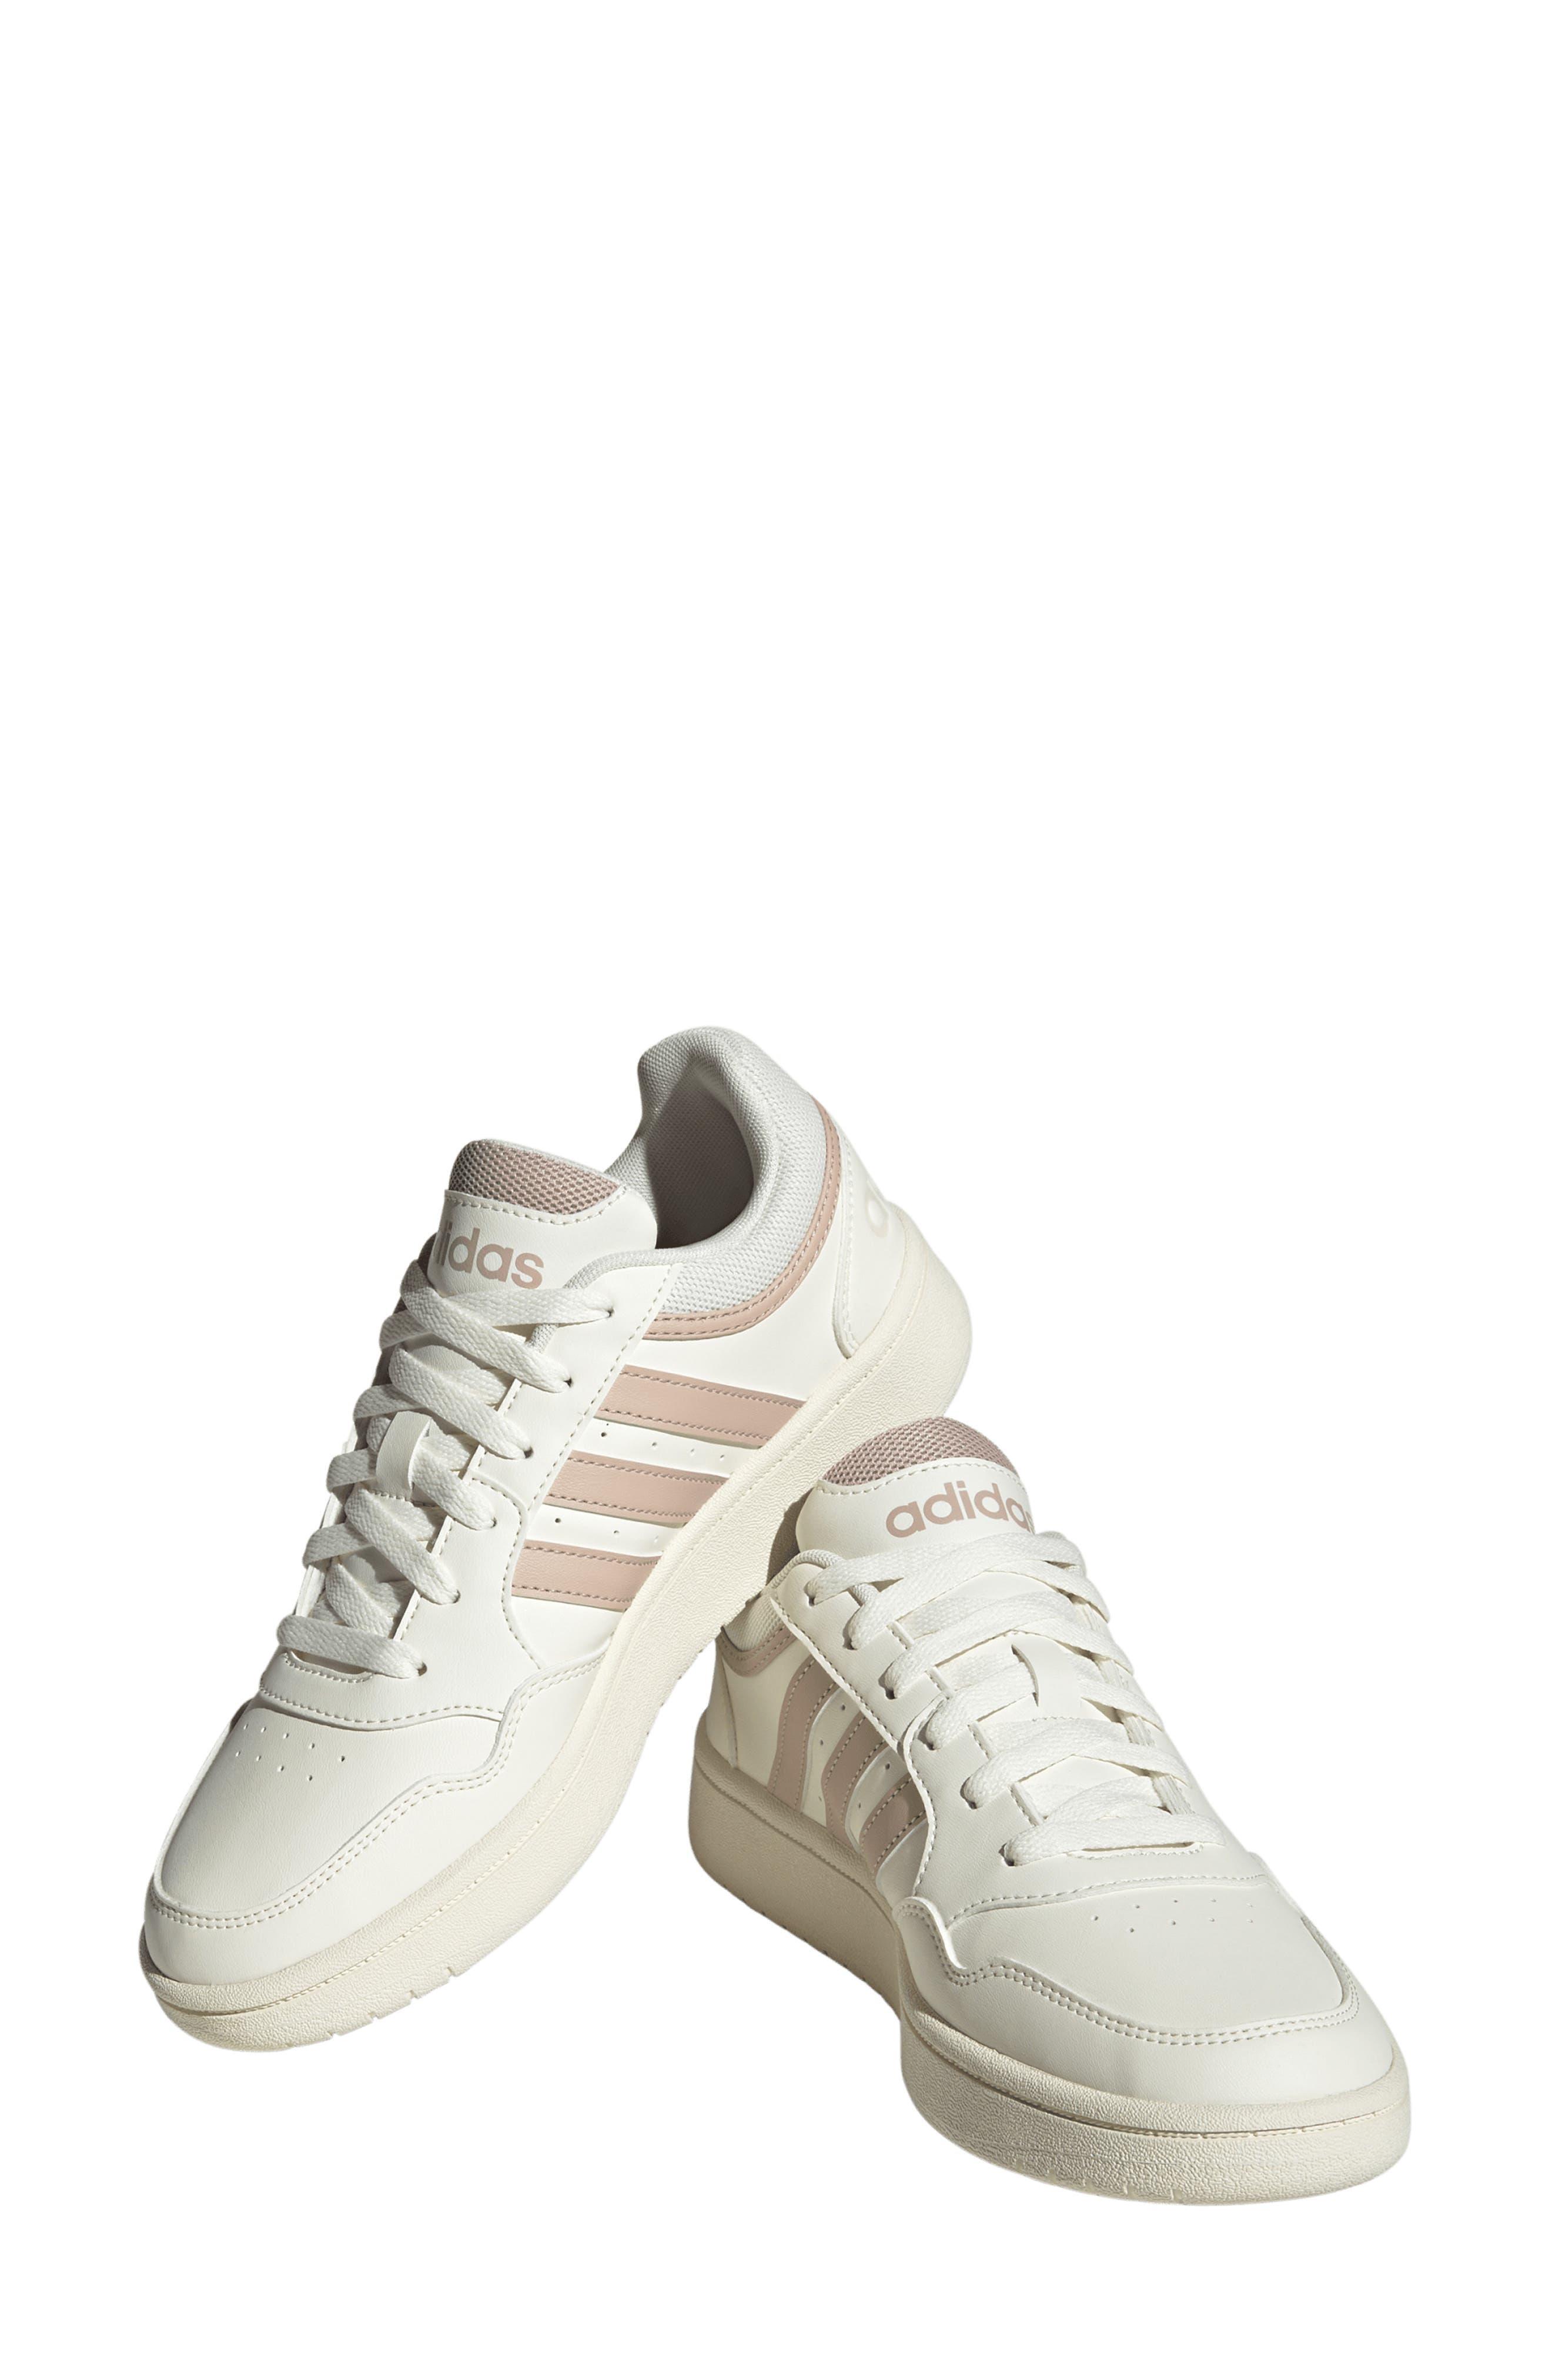 adidas Hoops 3.0 Sneaker In Off White/wonder Taupe/white At Nordstrom Rack  | Lyst